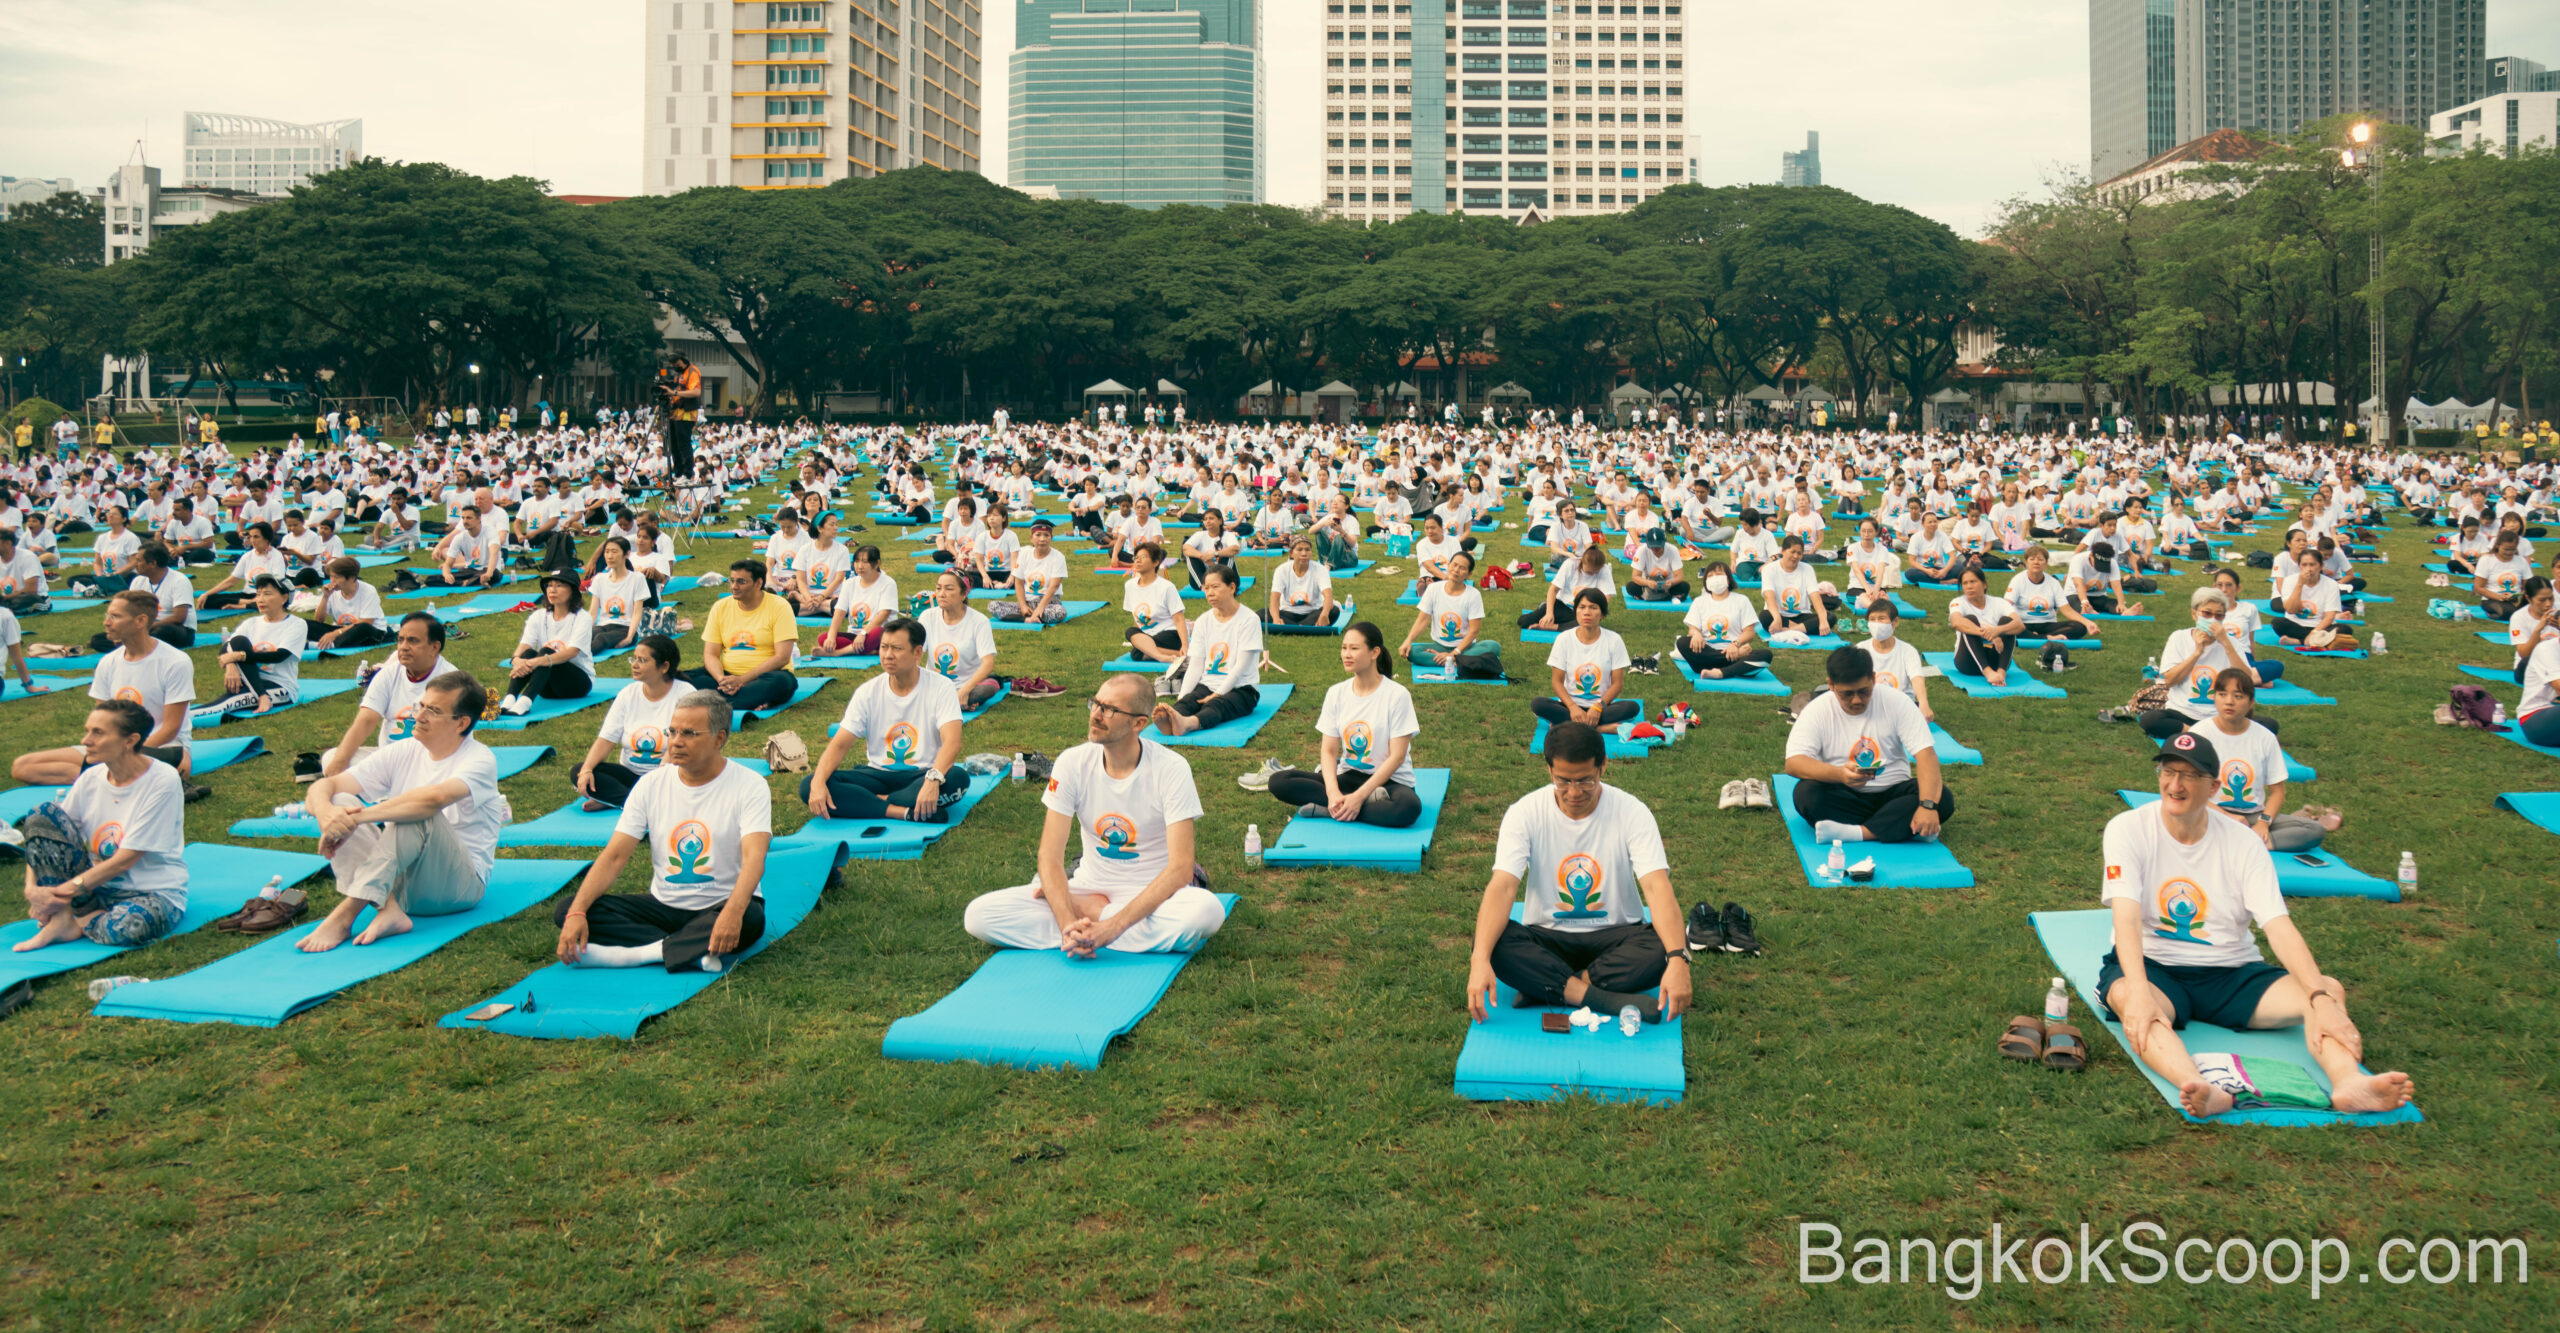 Massive Turnout of 5000+ Yoga Lovers at The Embassy of India’s Event, Bangkok!